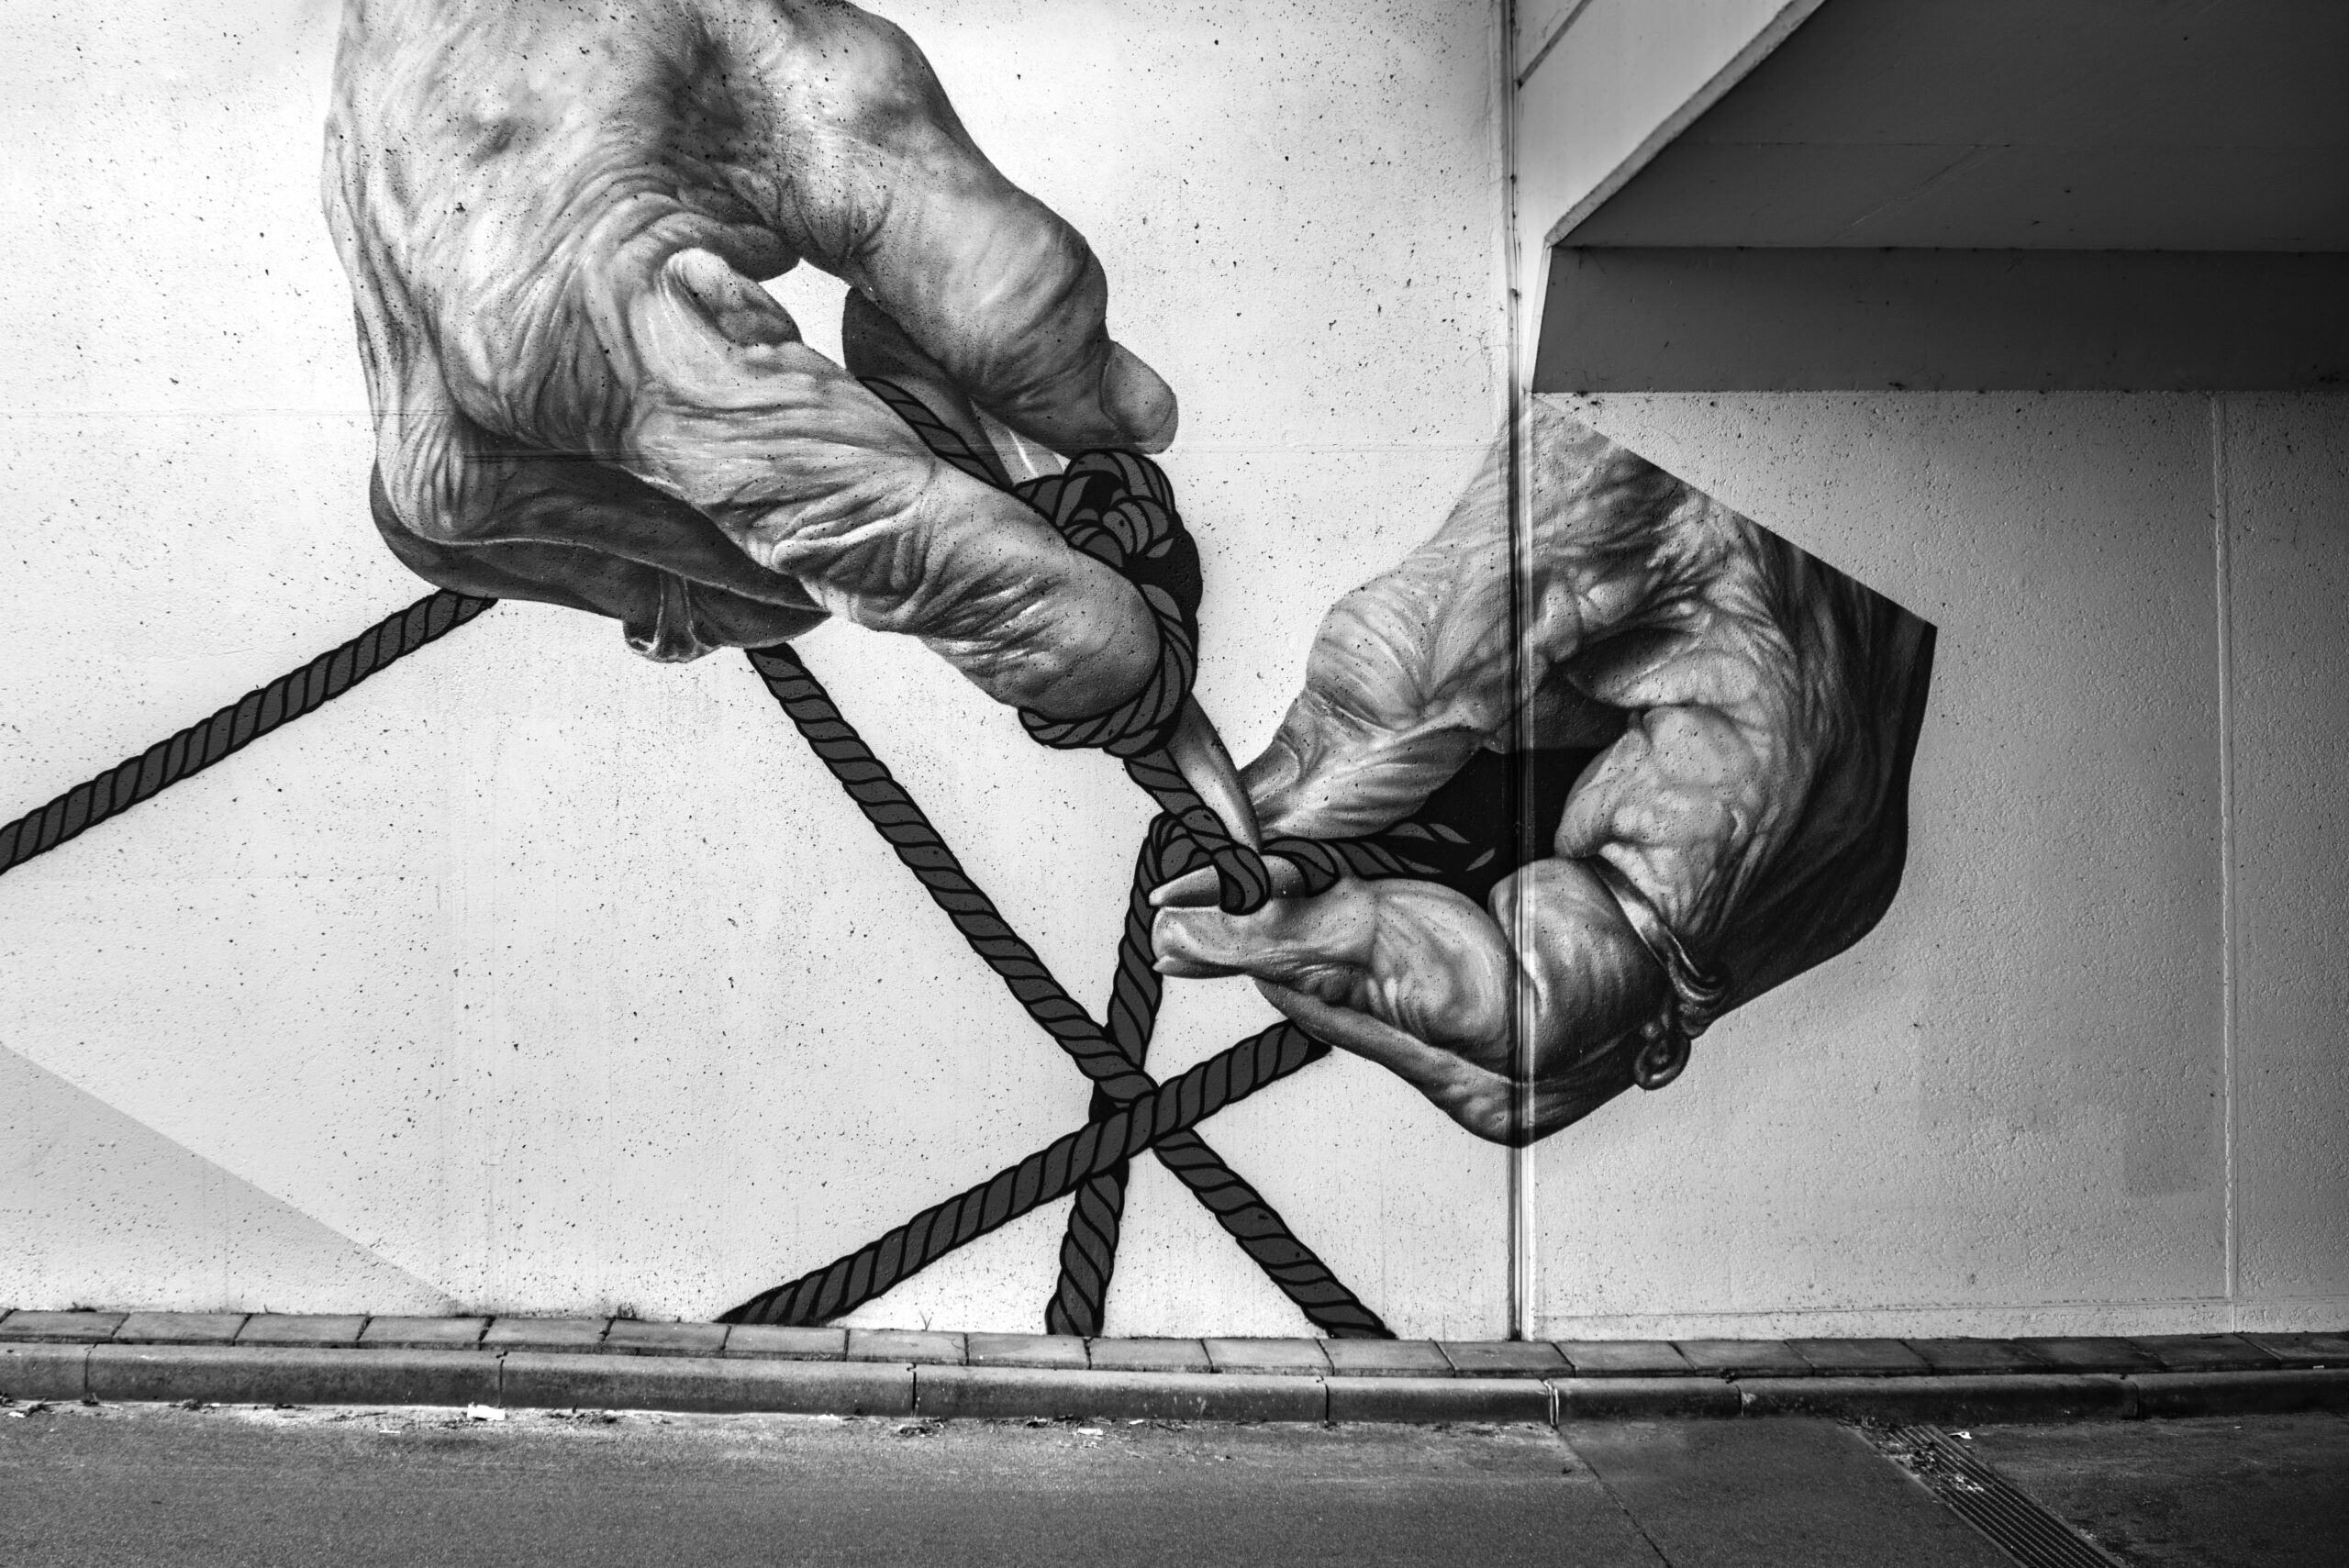 Image Of A Mural In Black And White That Features Two Hands Knitting. The Hands Are Wrinkled And So Are Likely From An Elderly Person